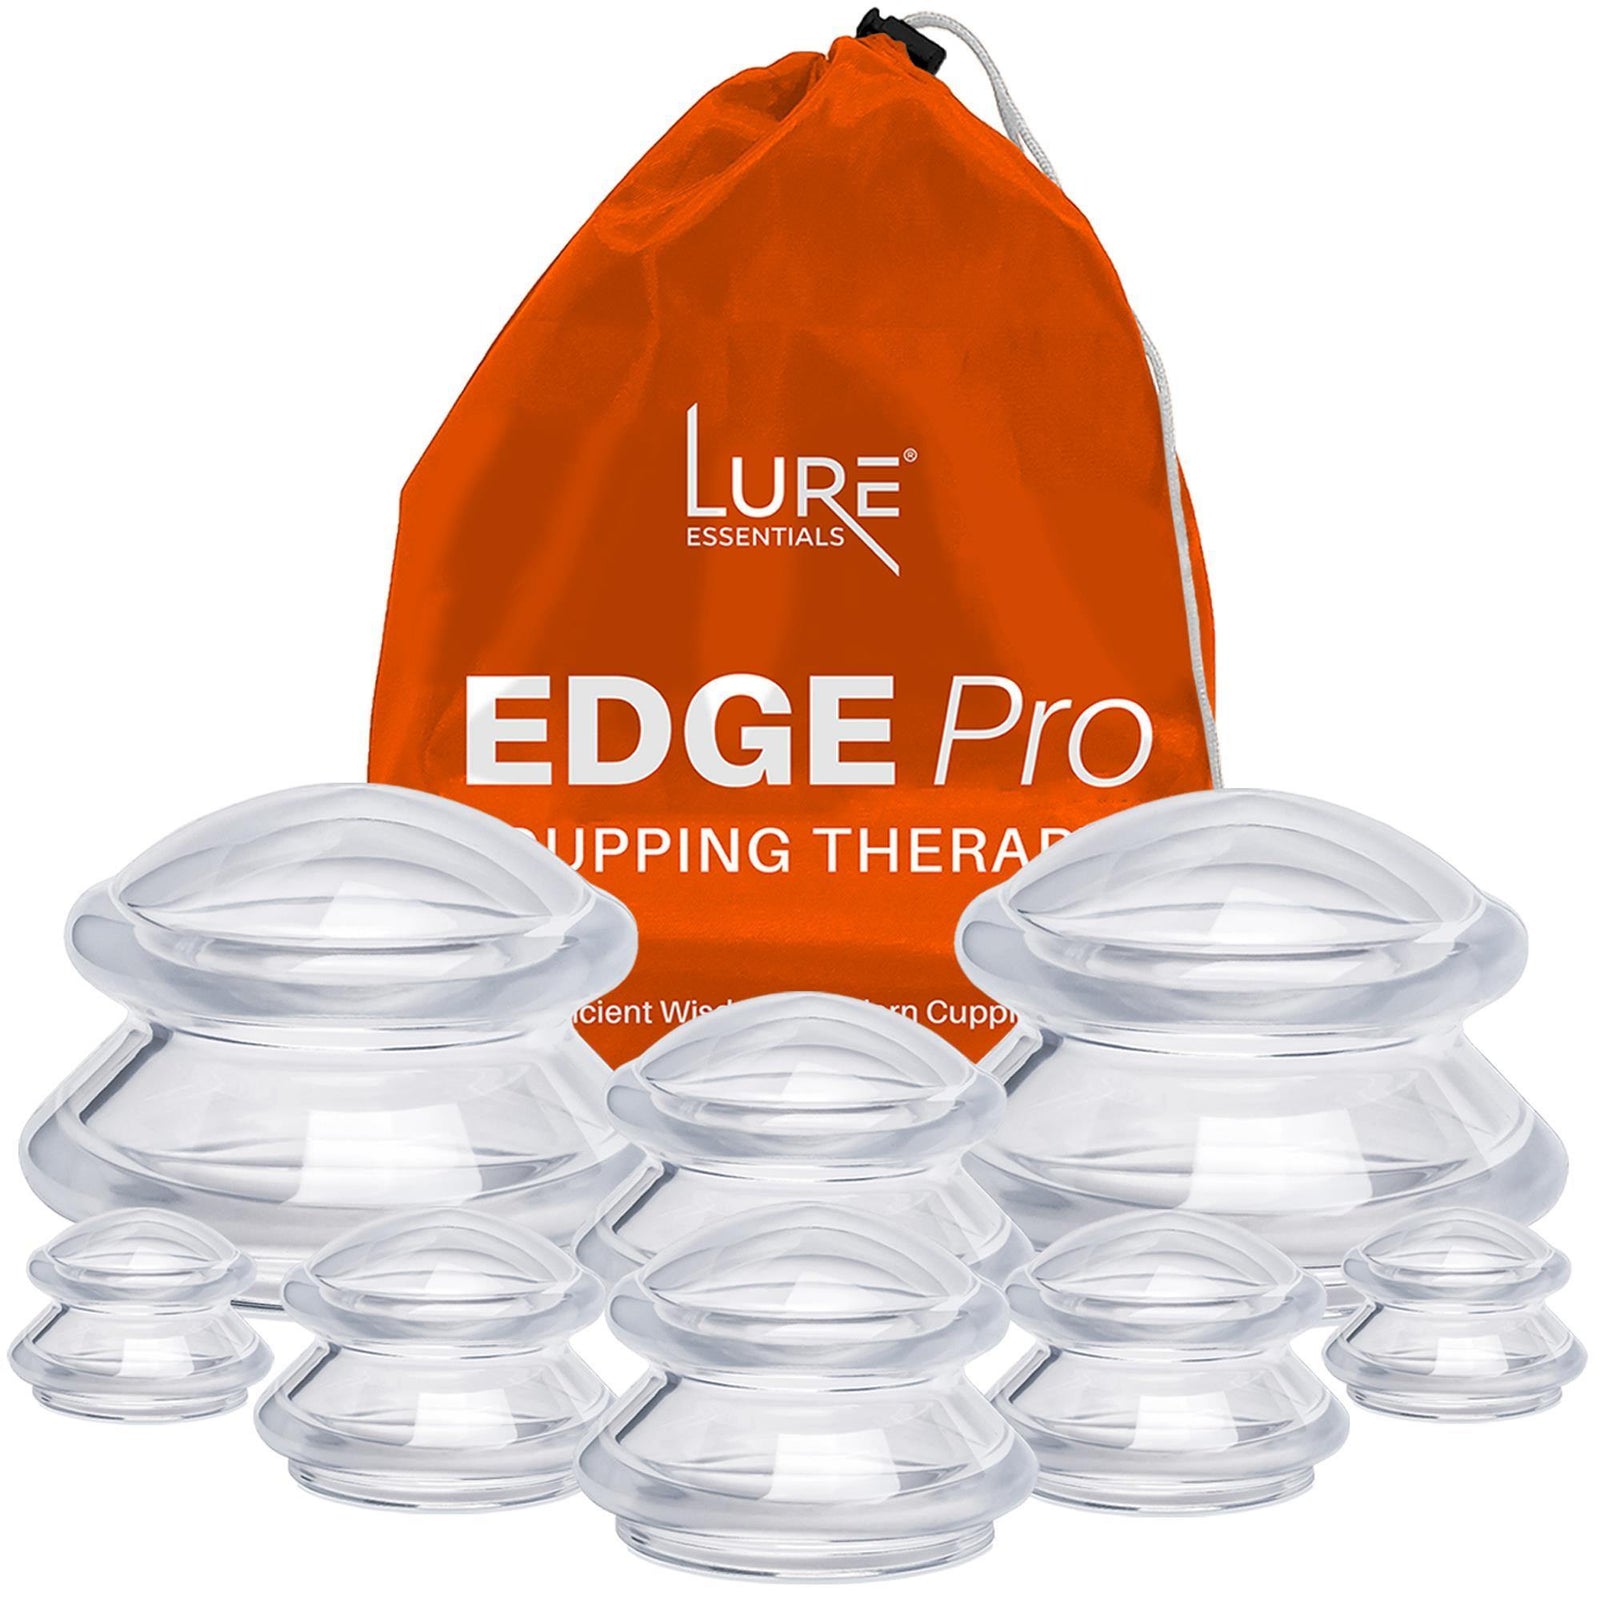 LURE Essentials Edge Cupping Set for Home Use and Massage Therapists,  Silicone Cupping Sets for Cellulite Reduction and Cupping Therapy (8 Cups -  2L